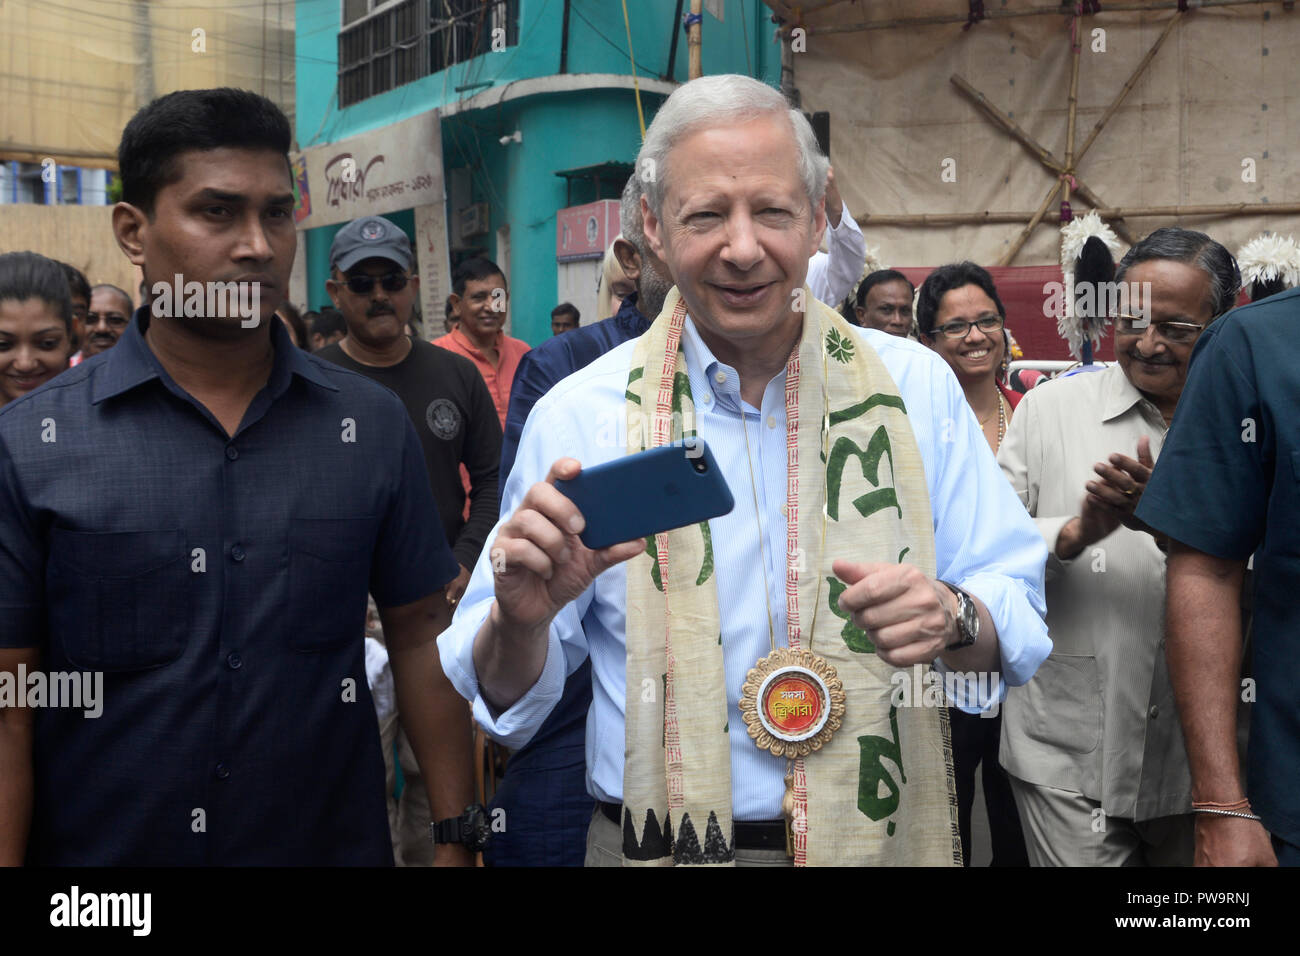 Kolkata, India. 13th Oct, 2018. U.S. Ambassador to India Kenneth I. Juster visit to the pandel or temporary platform decorated with jute products to promote the Jute Industry at Tridhara Sammilani Durga Puja festival during his visit to Kolkata on the occasion of Durga Puja Festival. Credit: Saikat Paul/Pacific Press/Alamy Live News Stock Photo